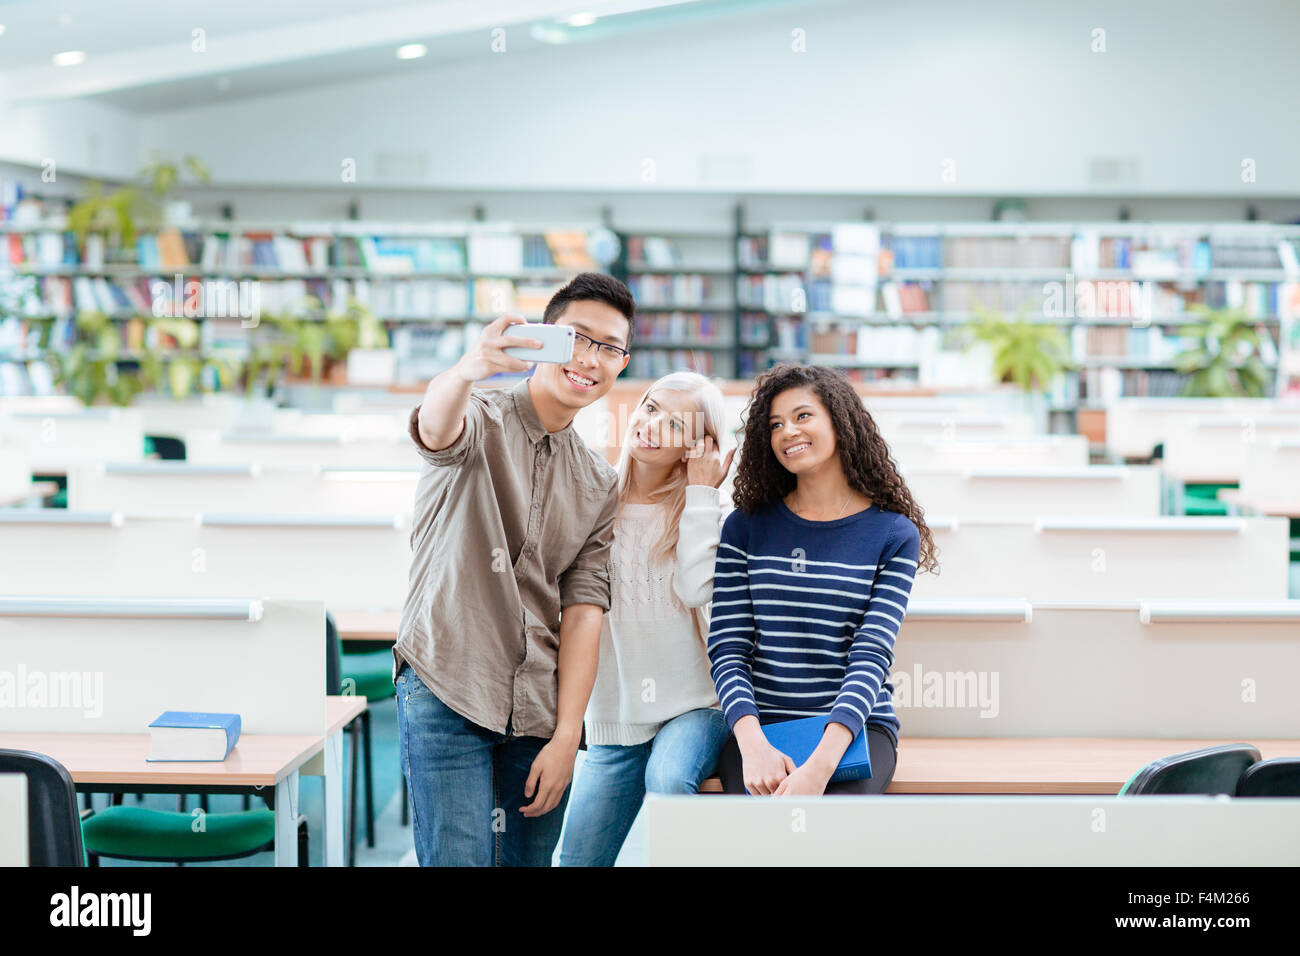 Portrait of a happy multi ethnic students making selfie photo on smartphone in the university library Stock Photo